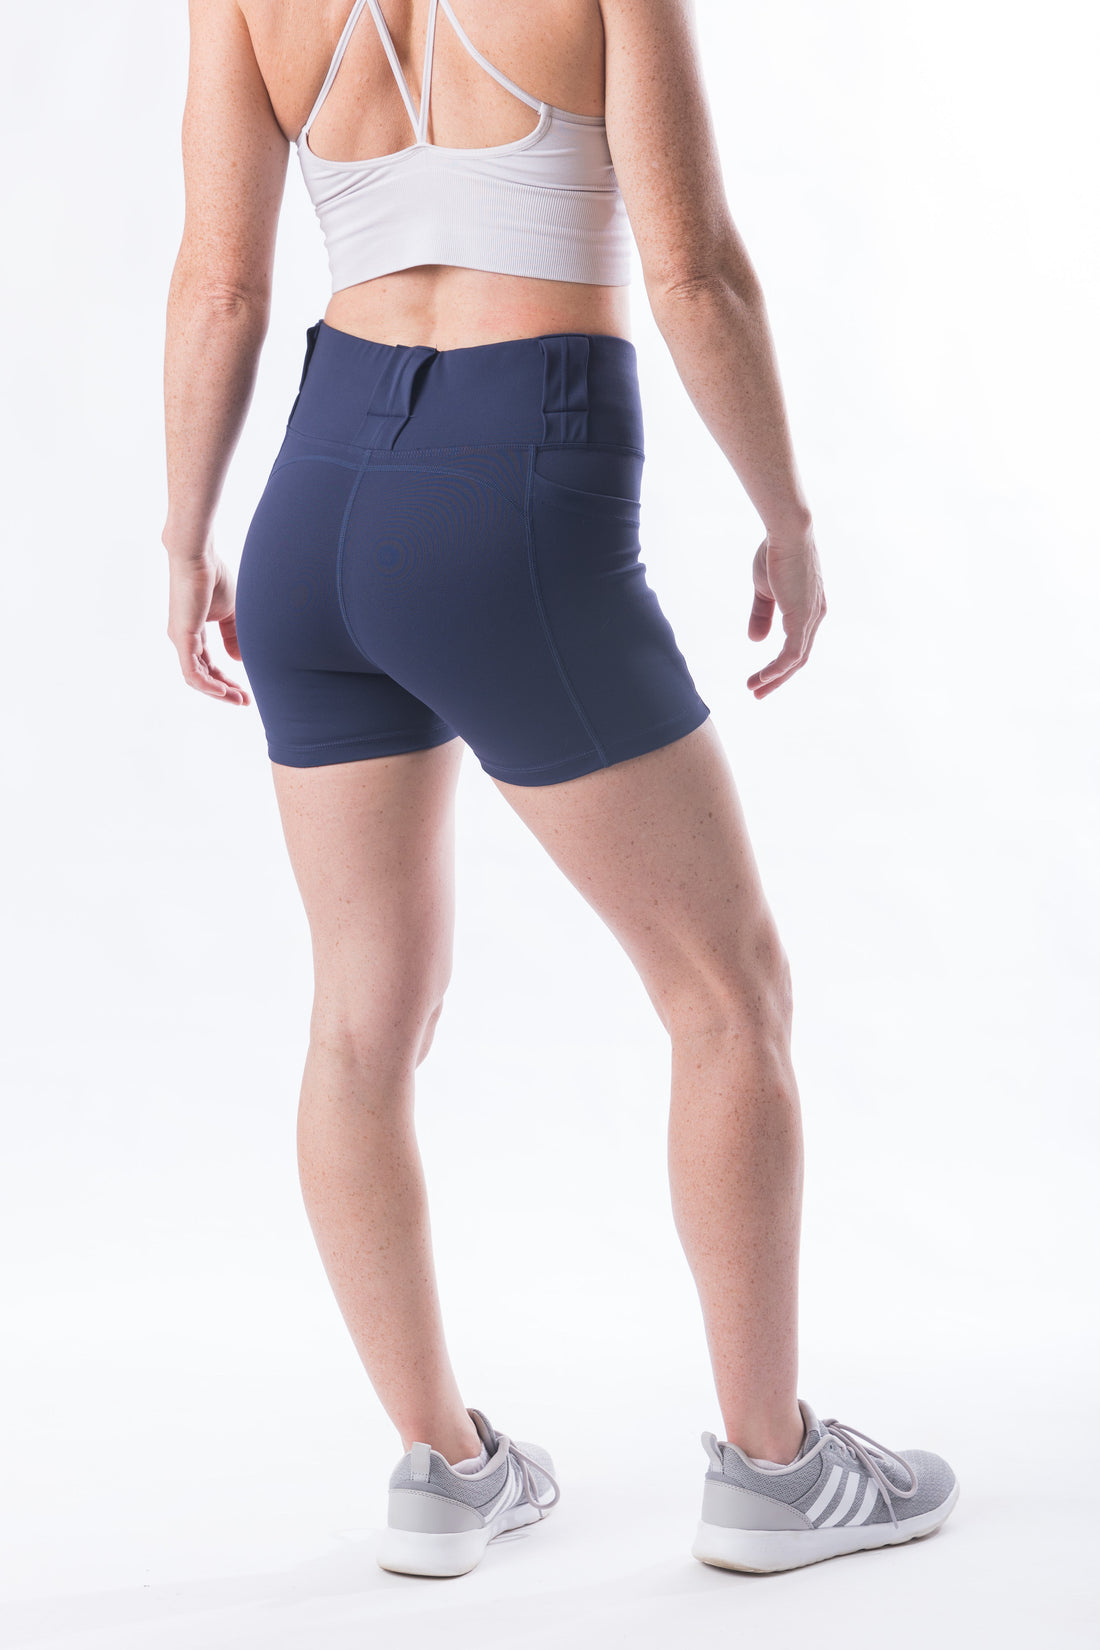 NEW Women's High Rise Curvy Carry Shorts, 3" inseam - Navy